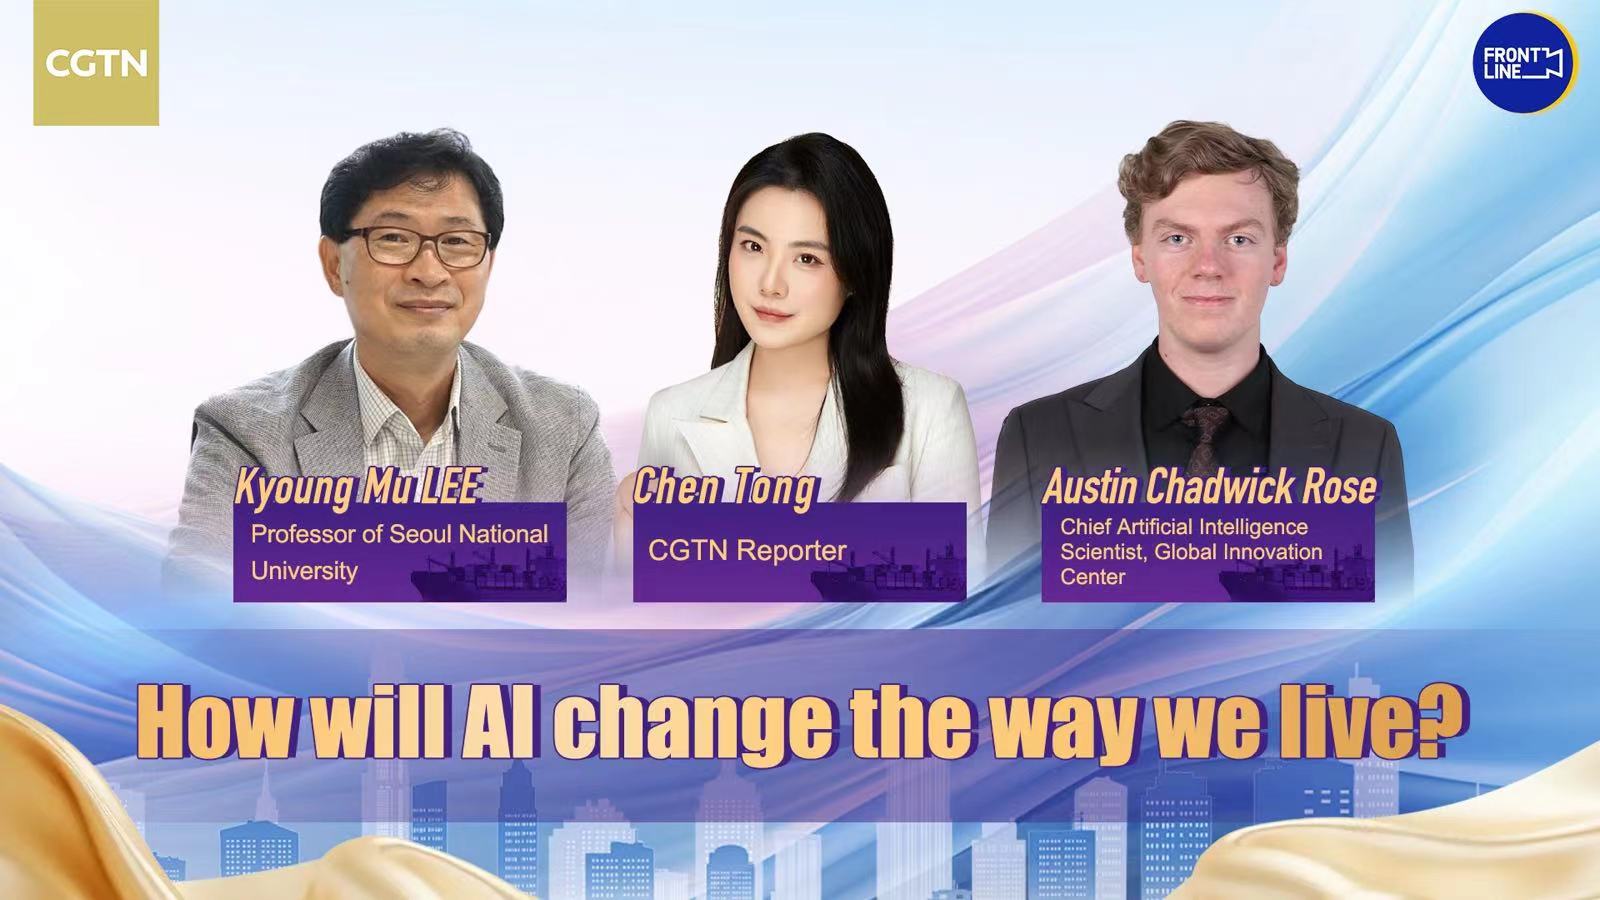 Live: How will AI change the way we live?